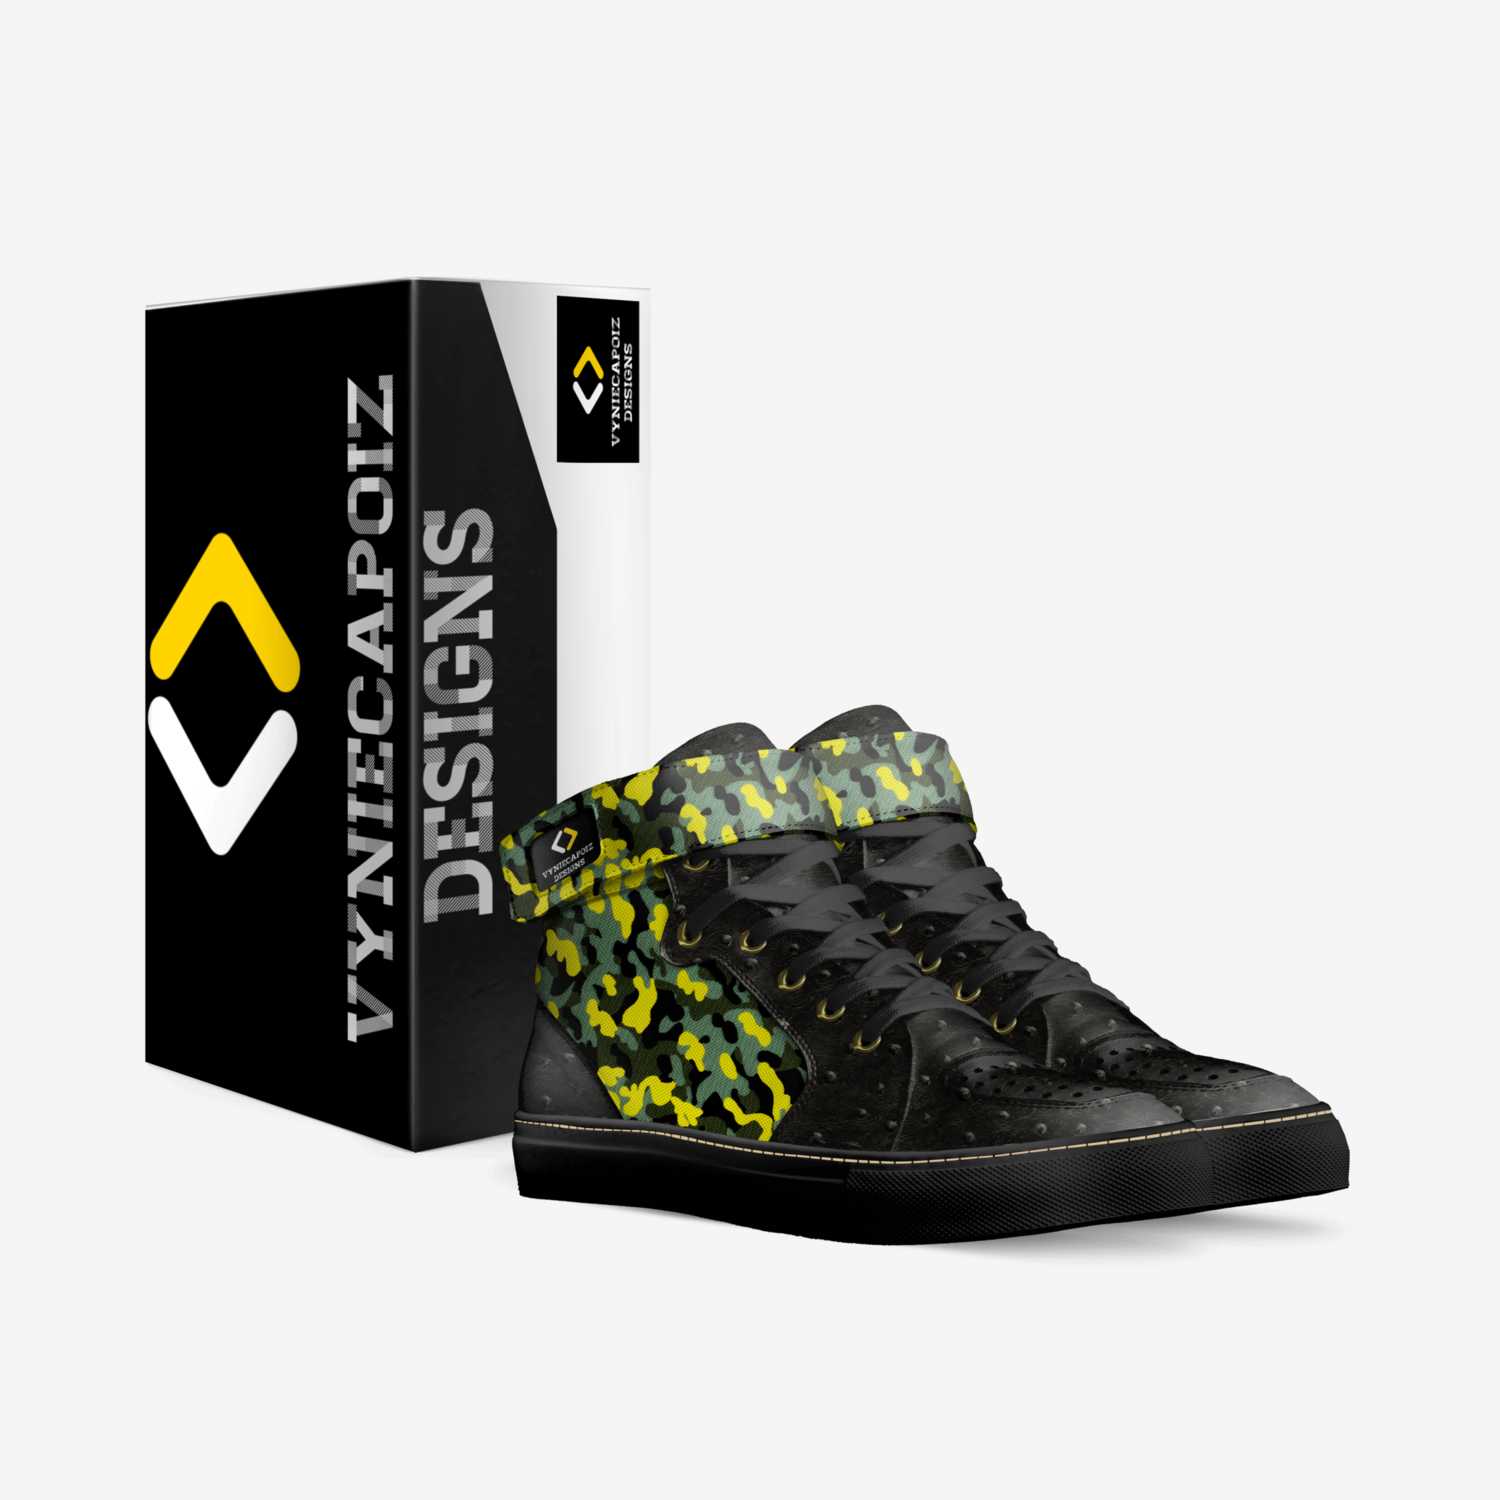 Vyniecapoi'z custom made in Italy shoes by Leslie Gray | Box view